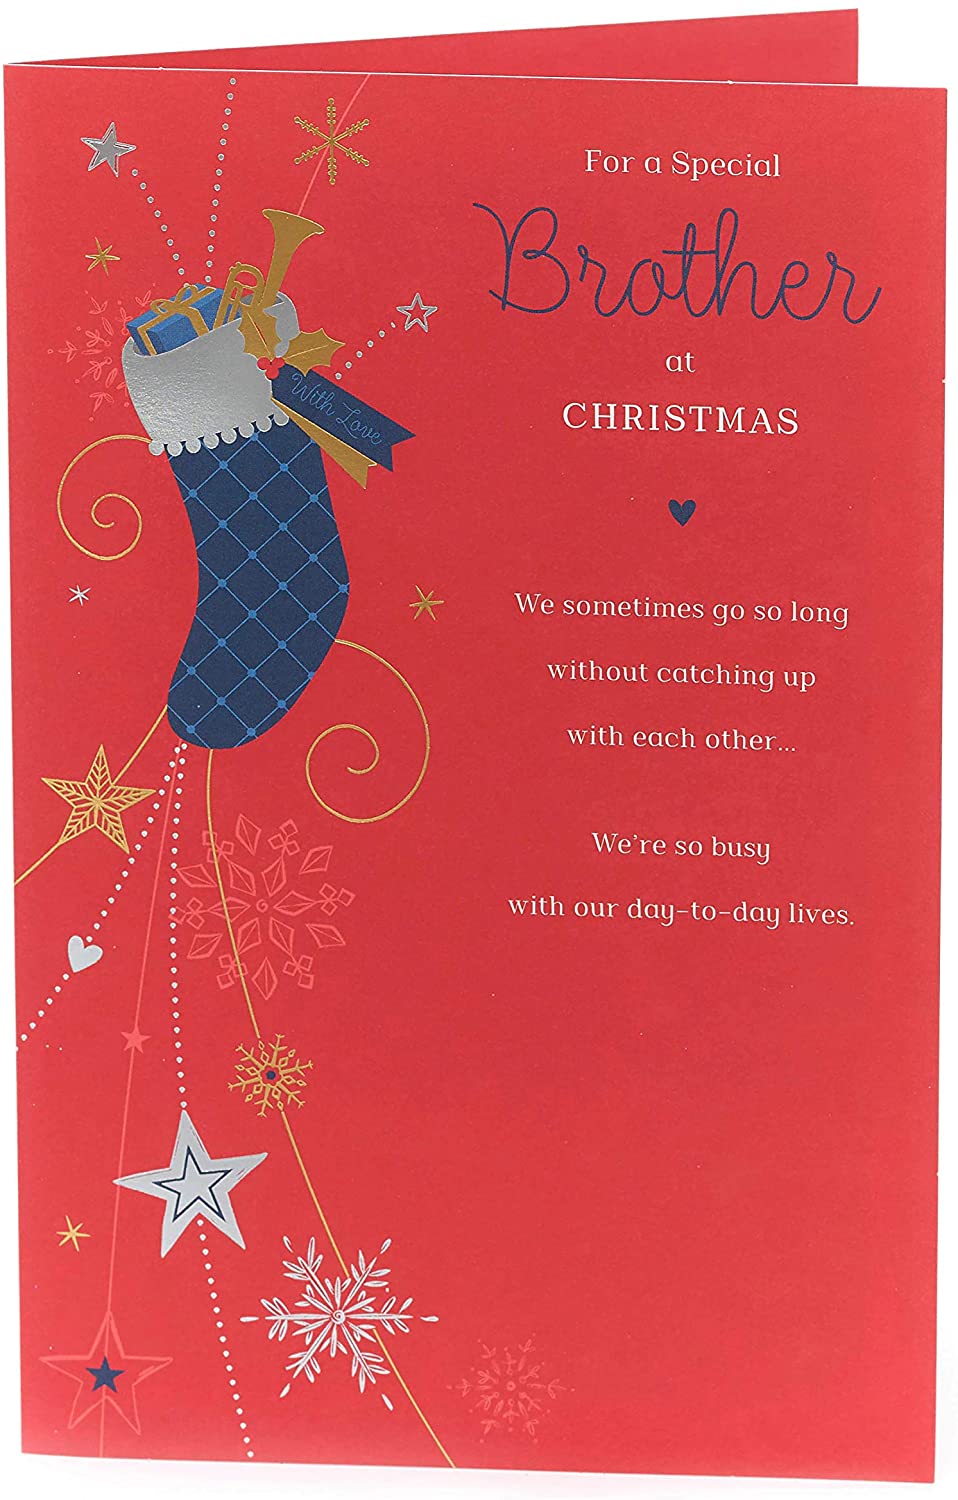 Christmas Card for Brother Featuring Lovely Message Inside